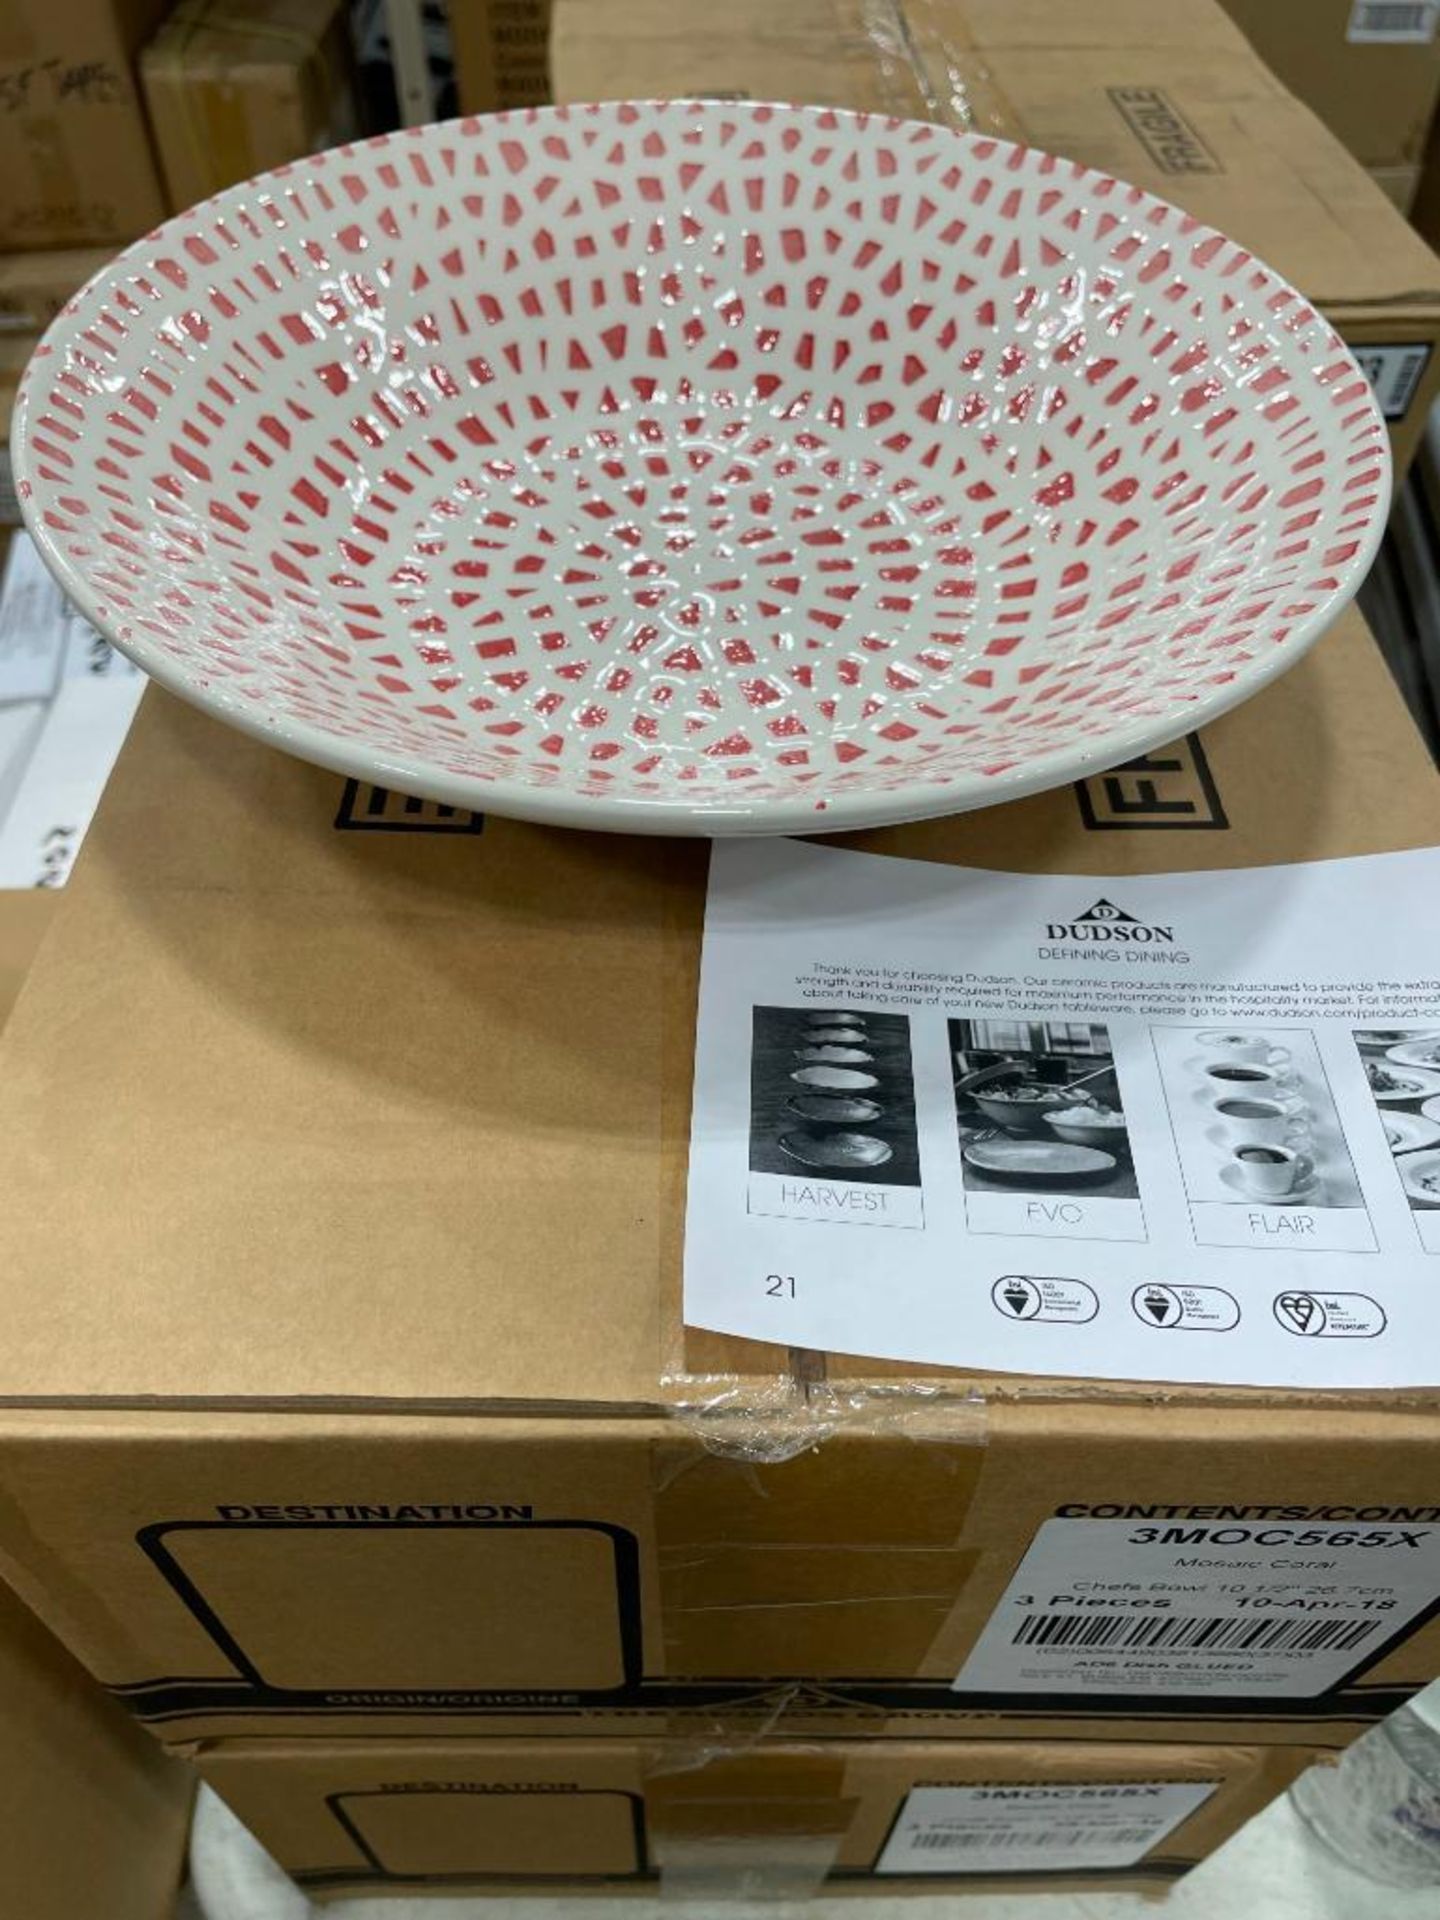 2 CASES OF DUDSON MOSAIC CORAL CHEF BOWLS 10 1/2" - 3/CASE - MADE IN ENGLAND